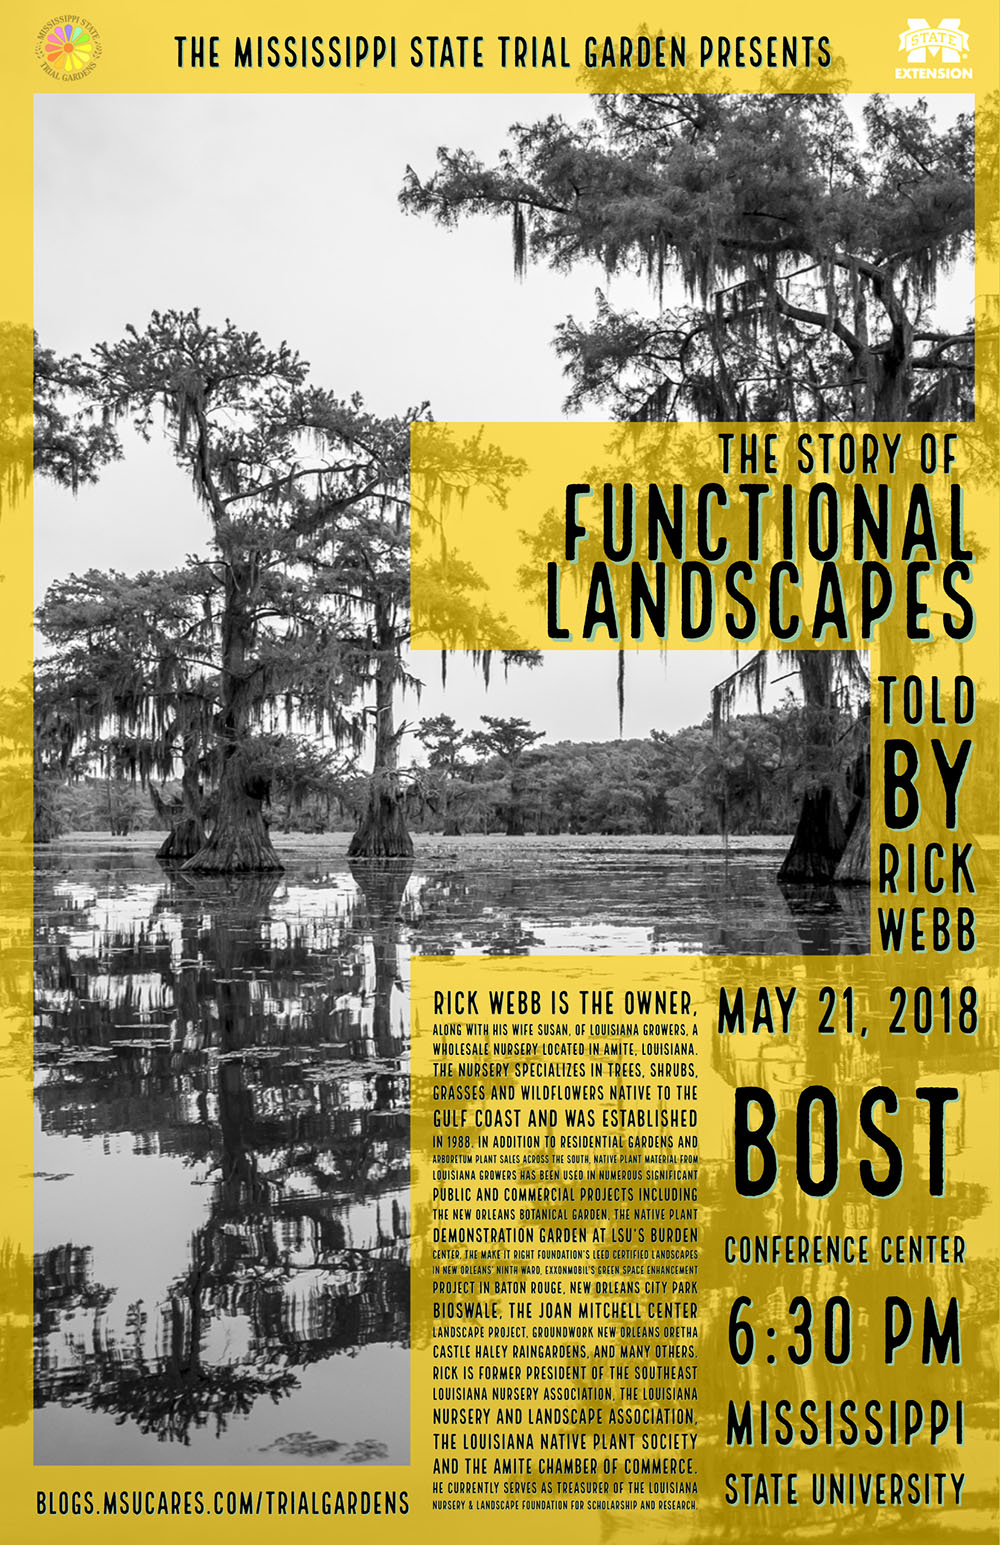 The Story of Functional Landscapes